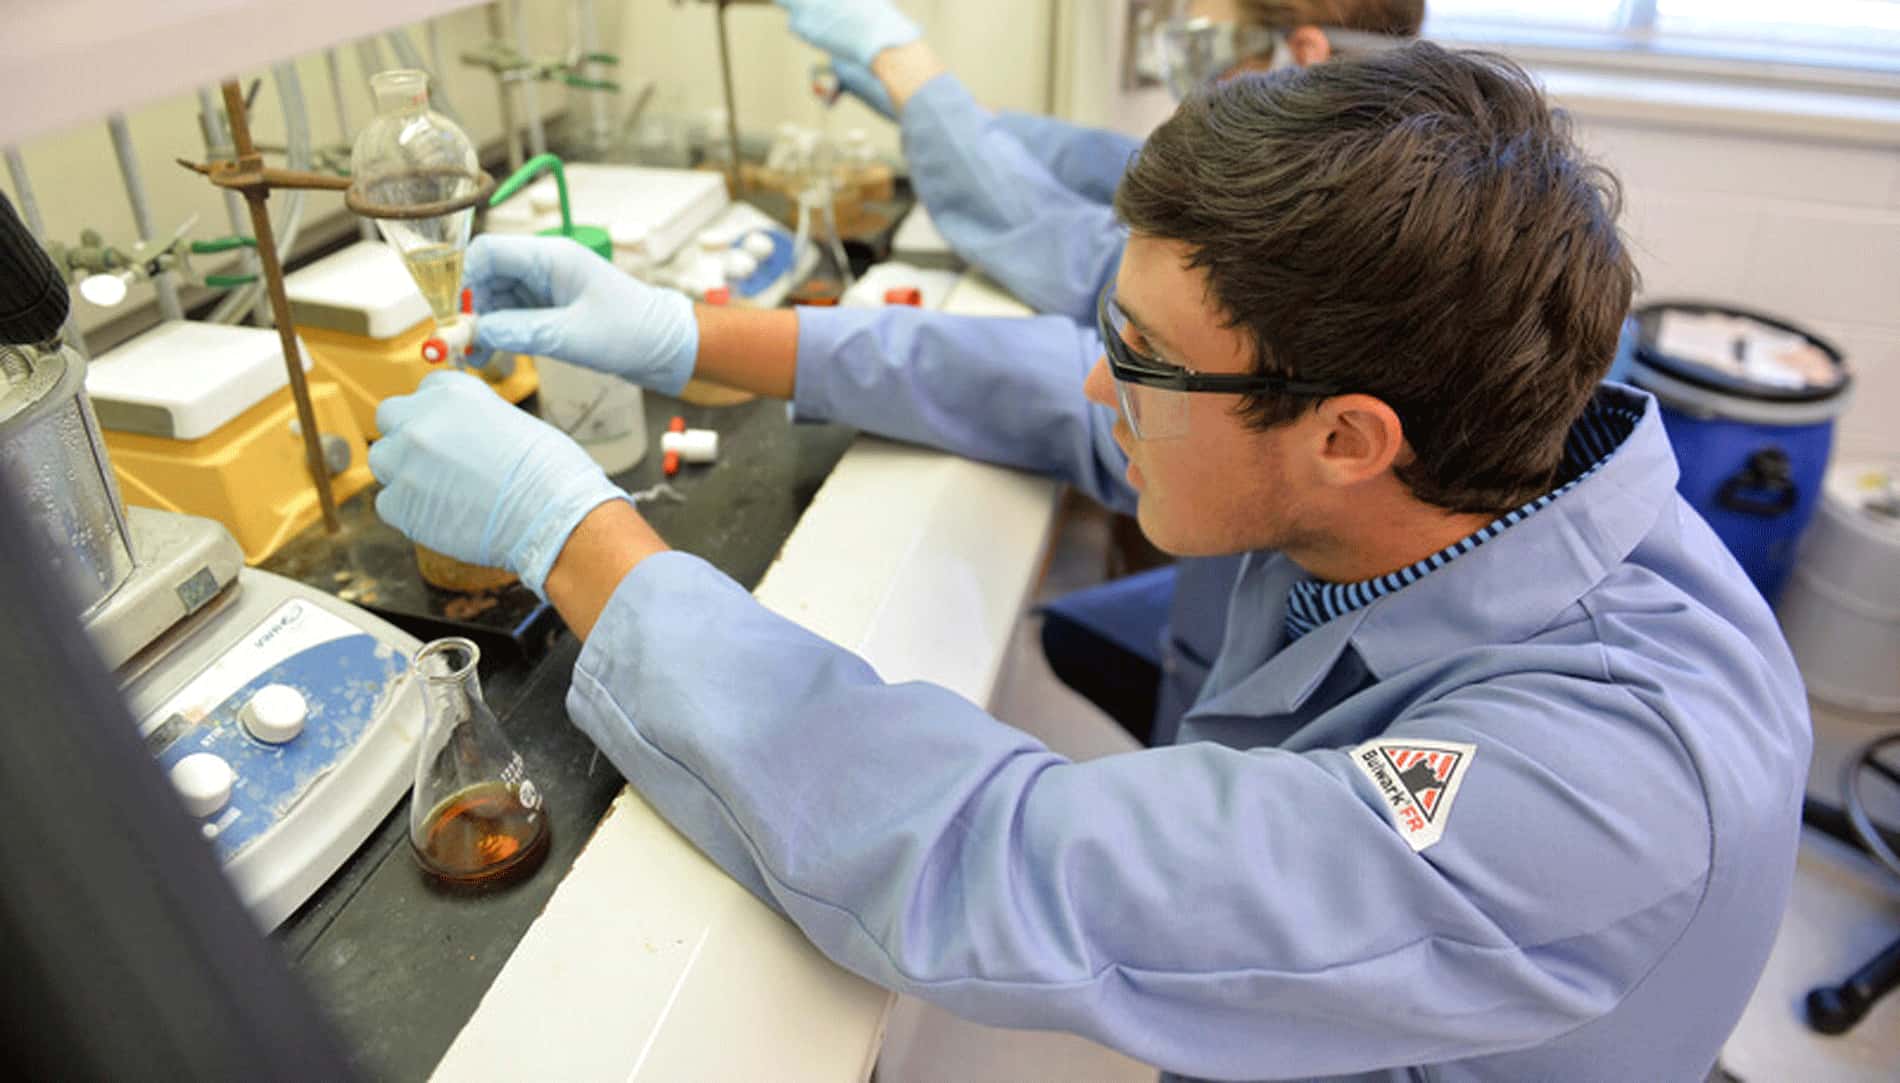 Student performing a lab experiment